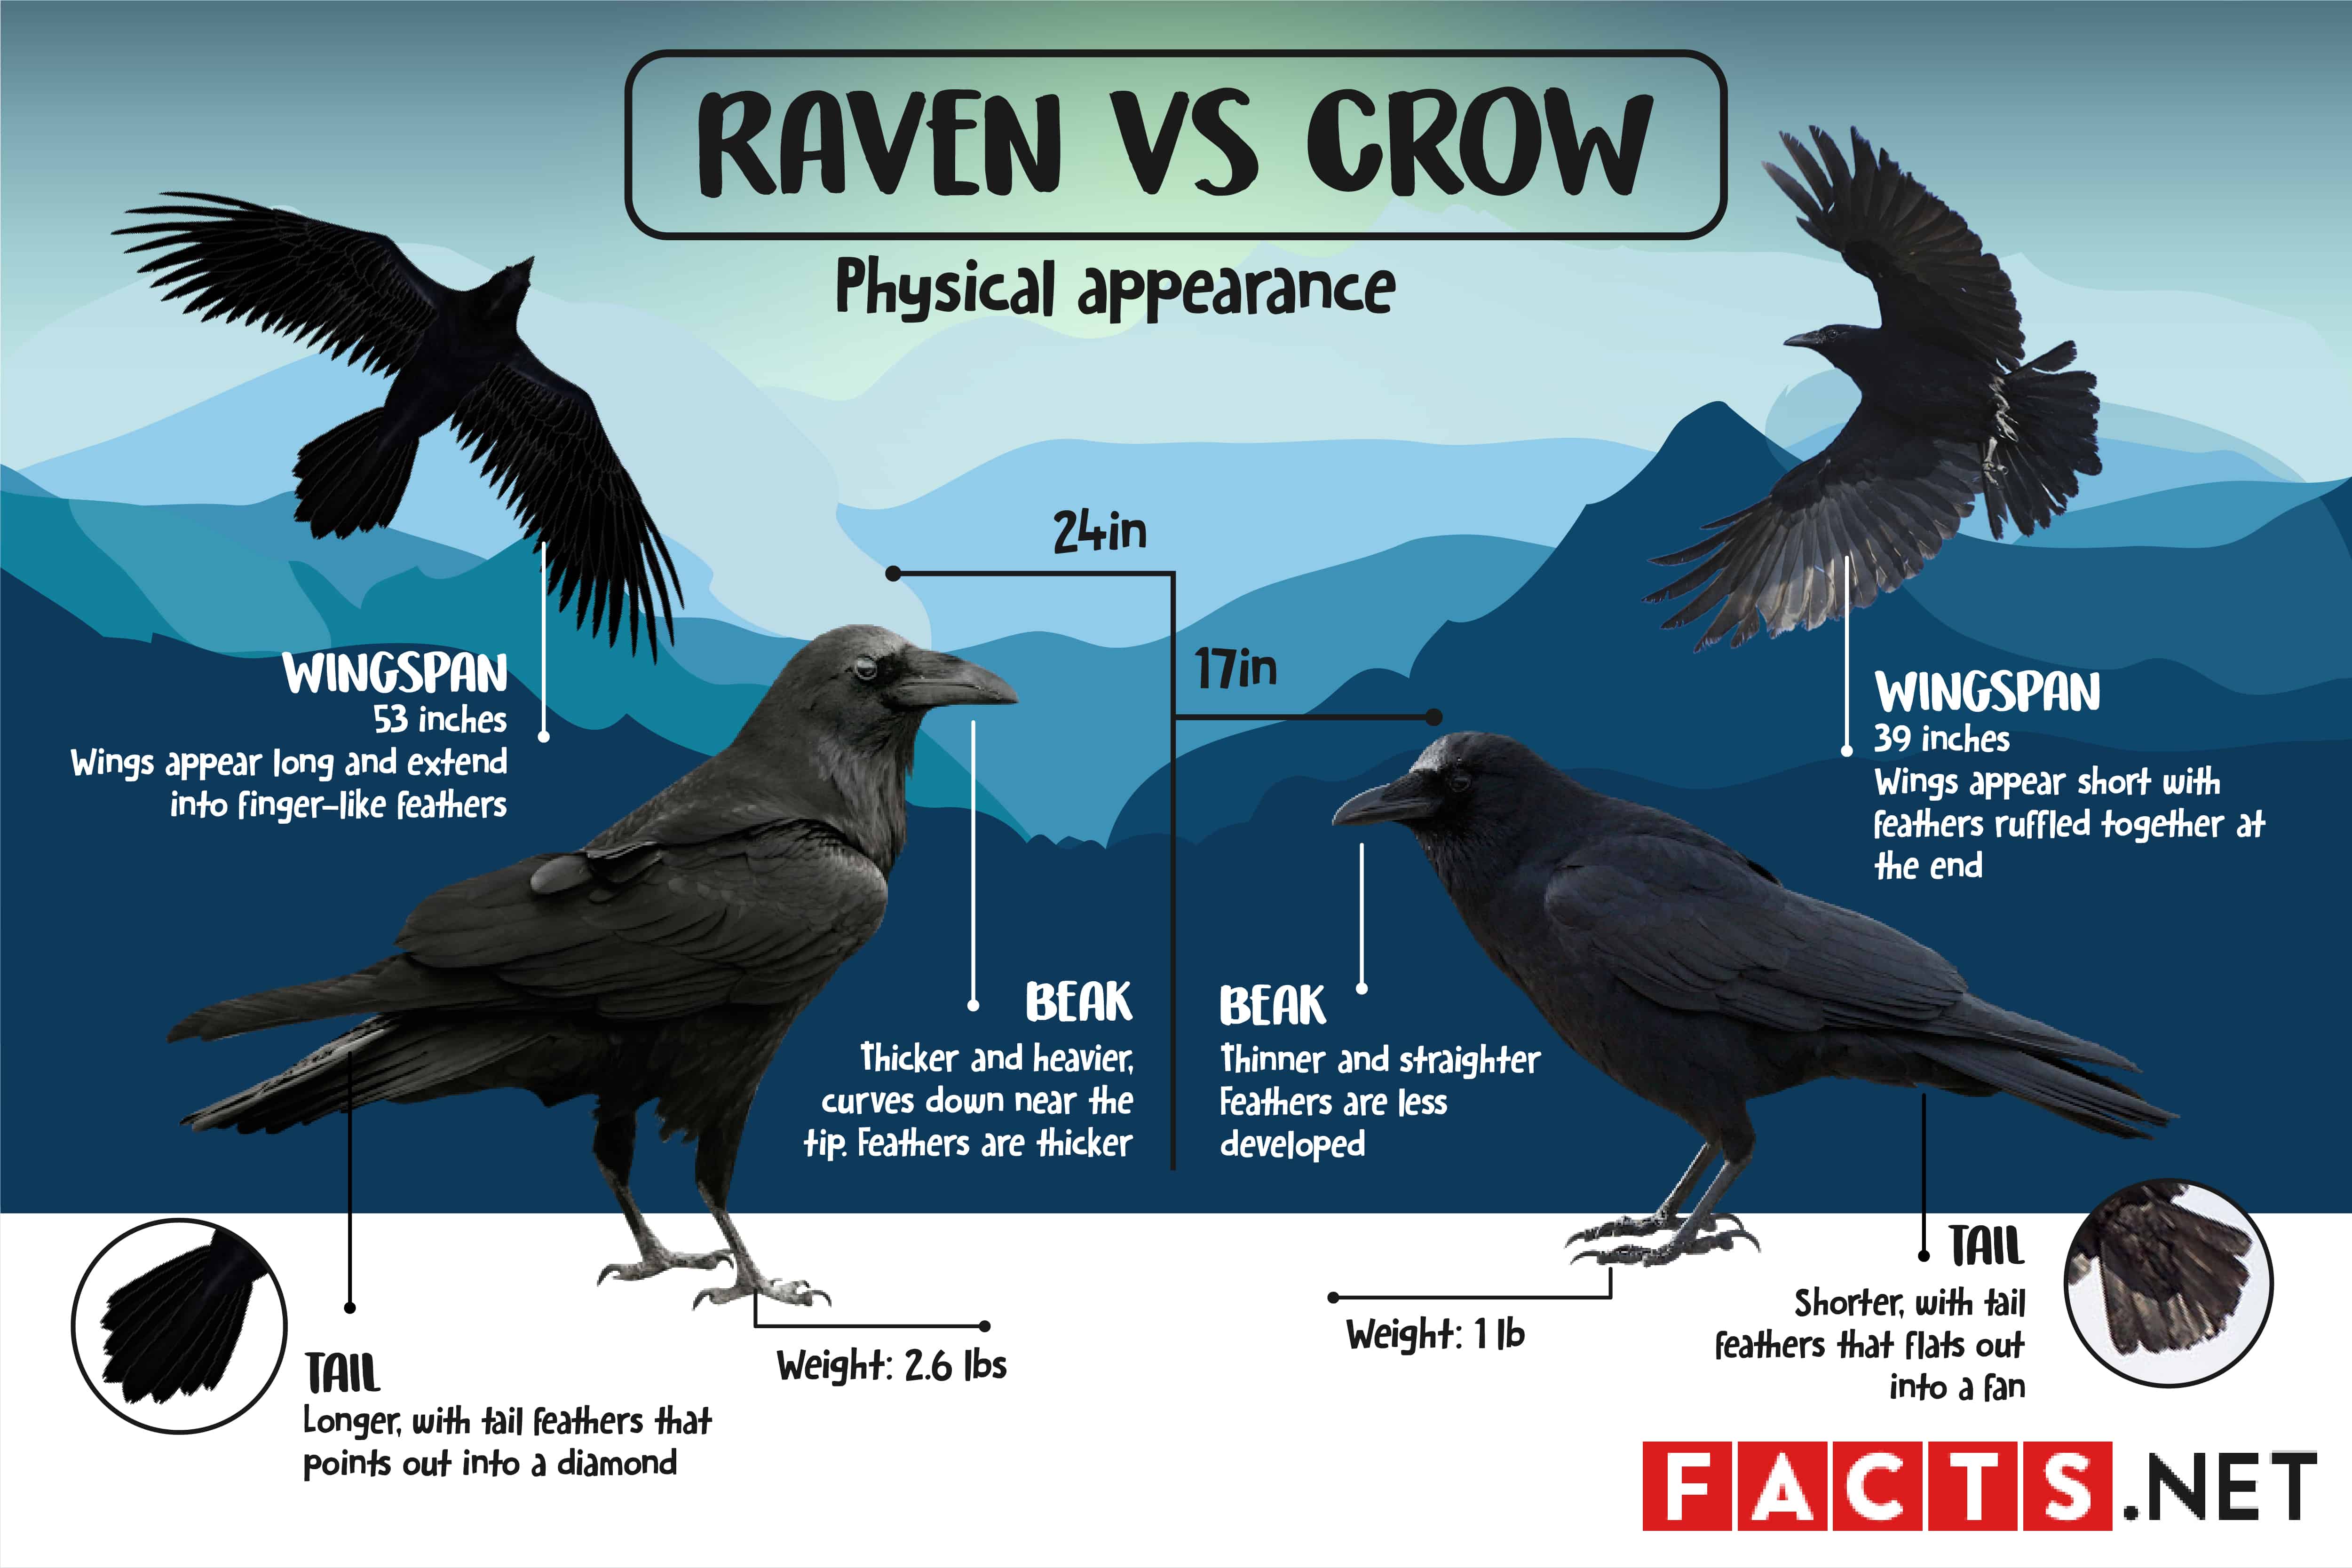 A fish called raven